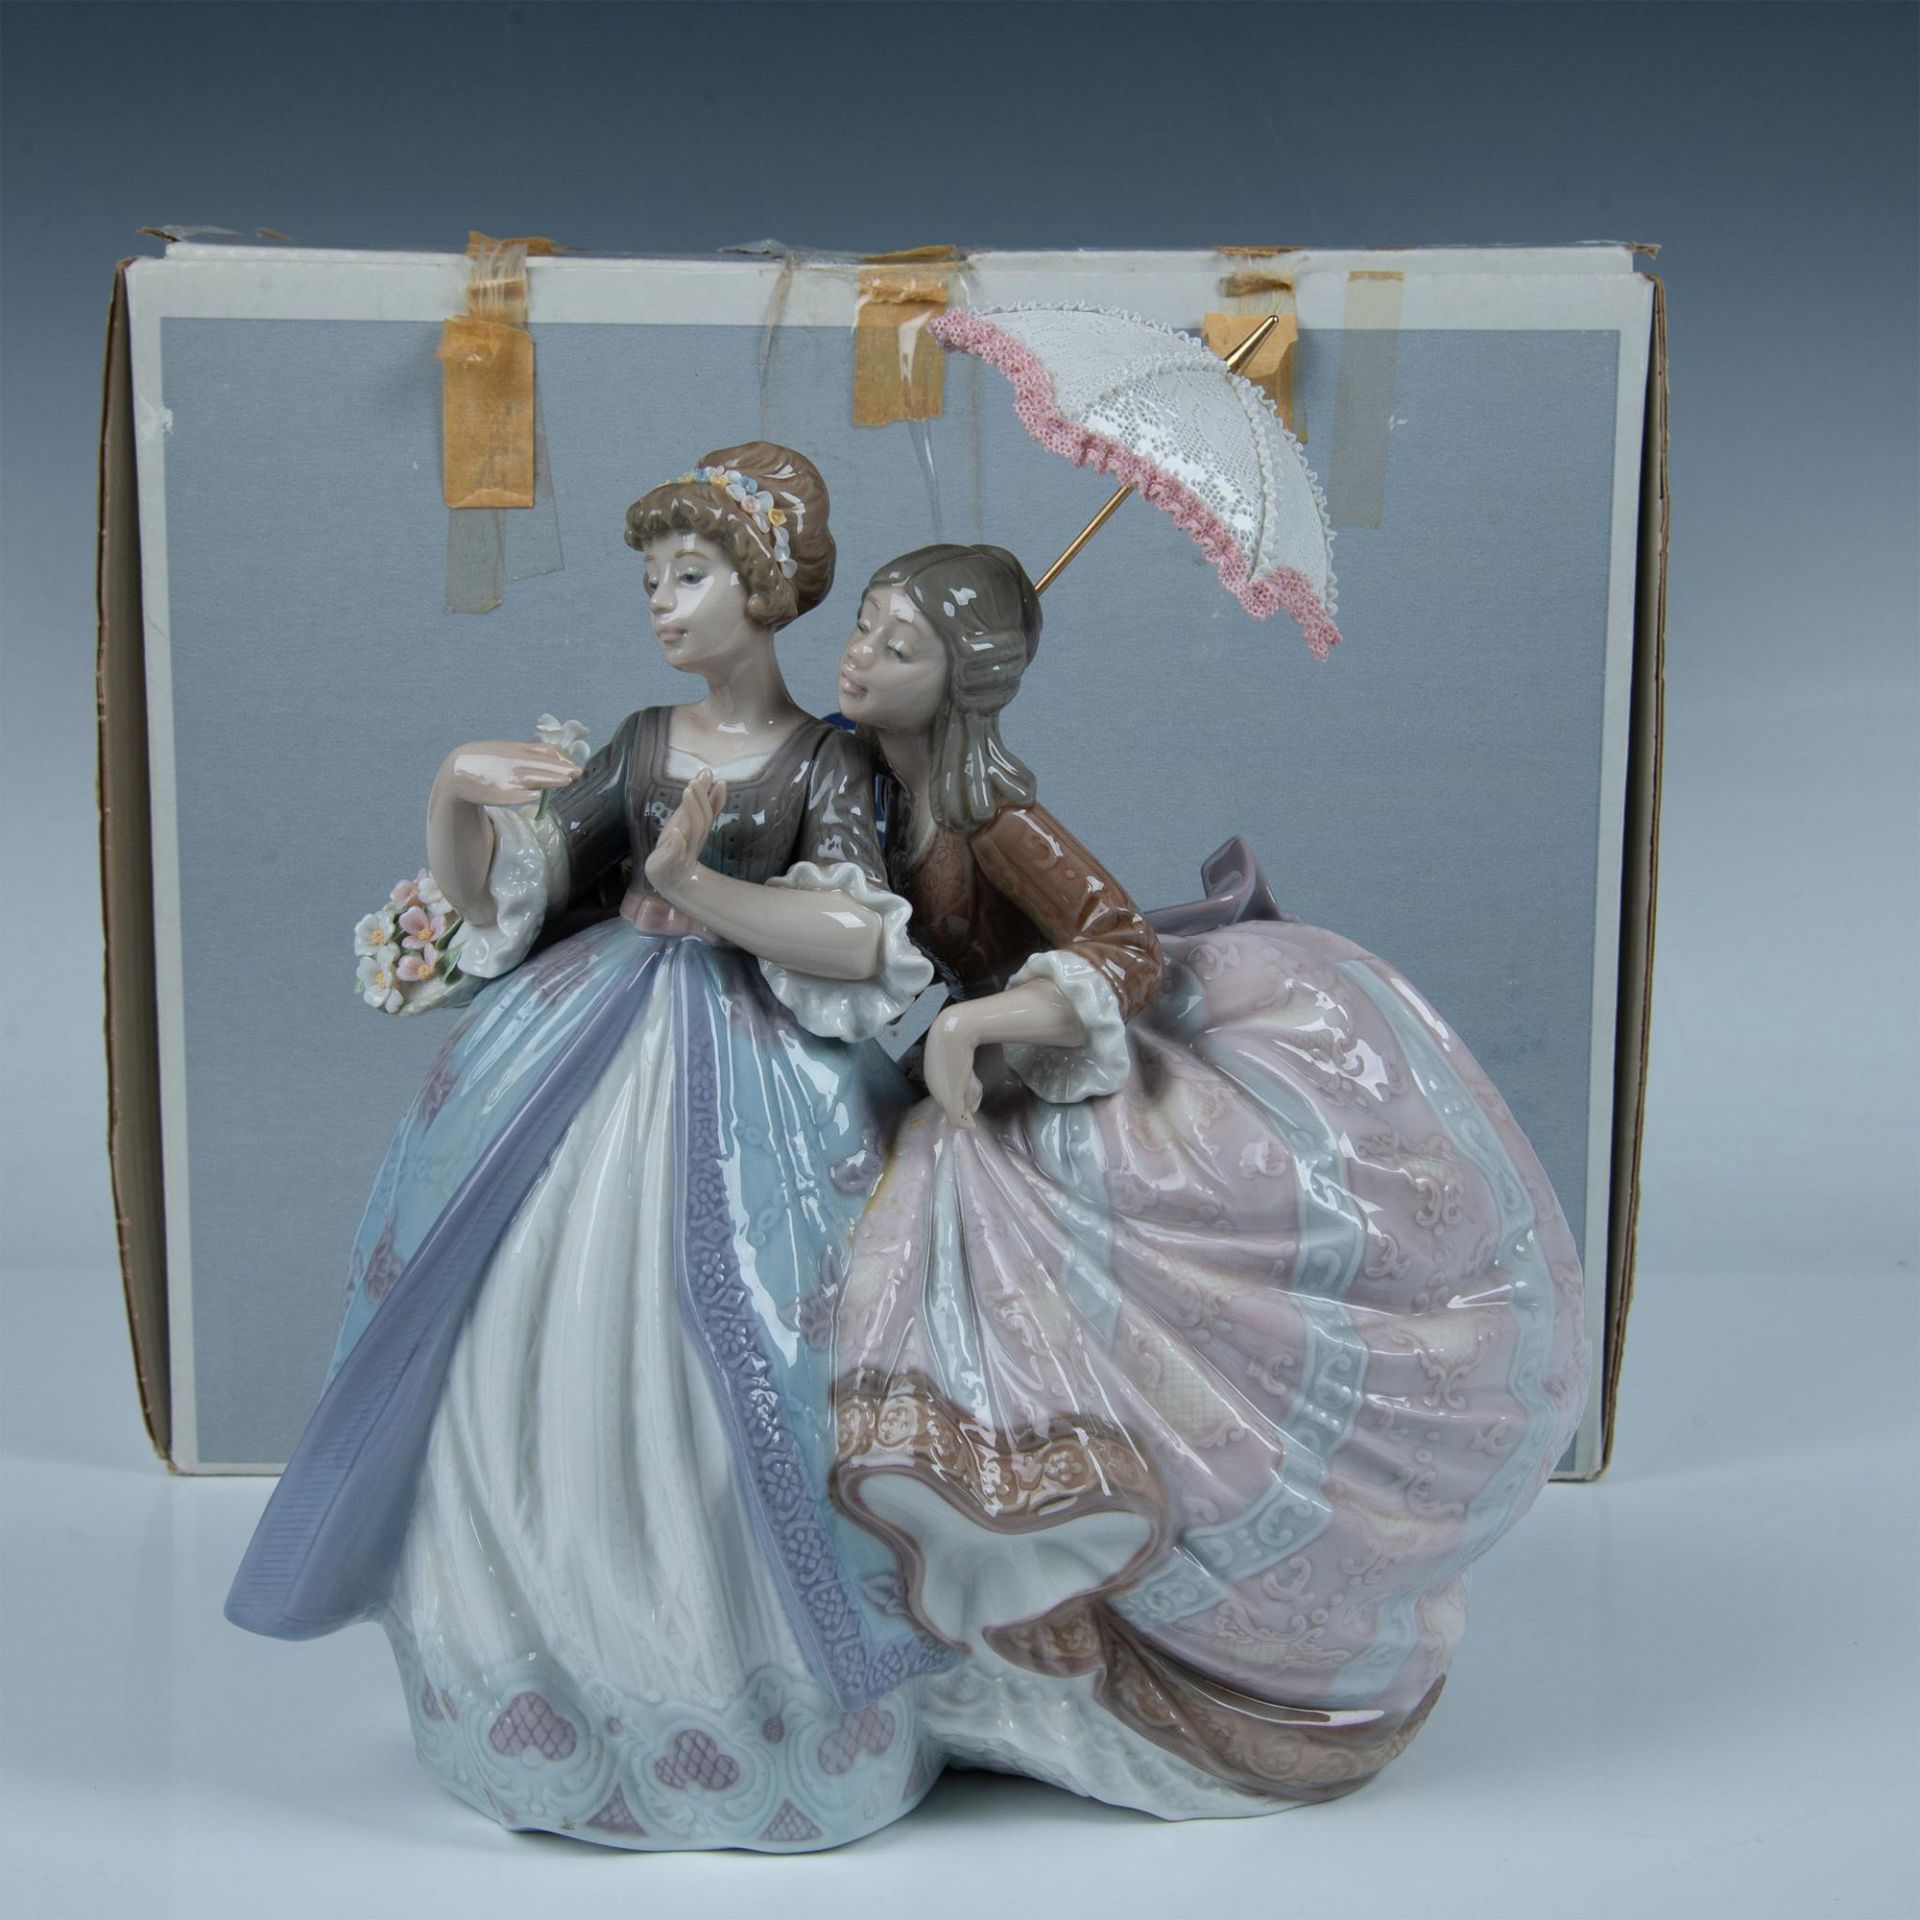 Southern Charm 1005700 - Lladro Porcelain Figurine - Image 3 of 8